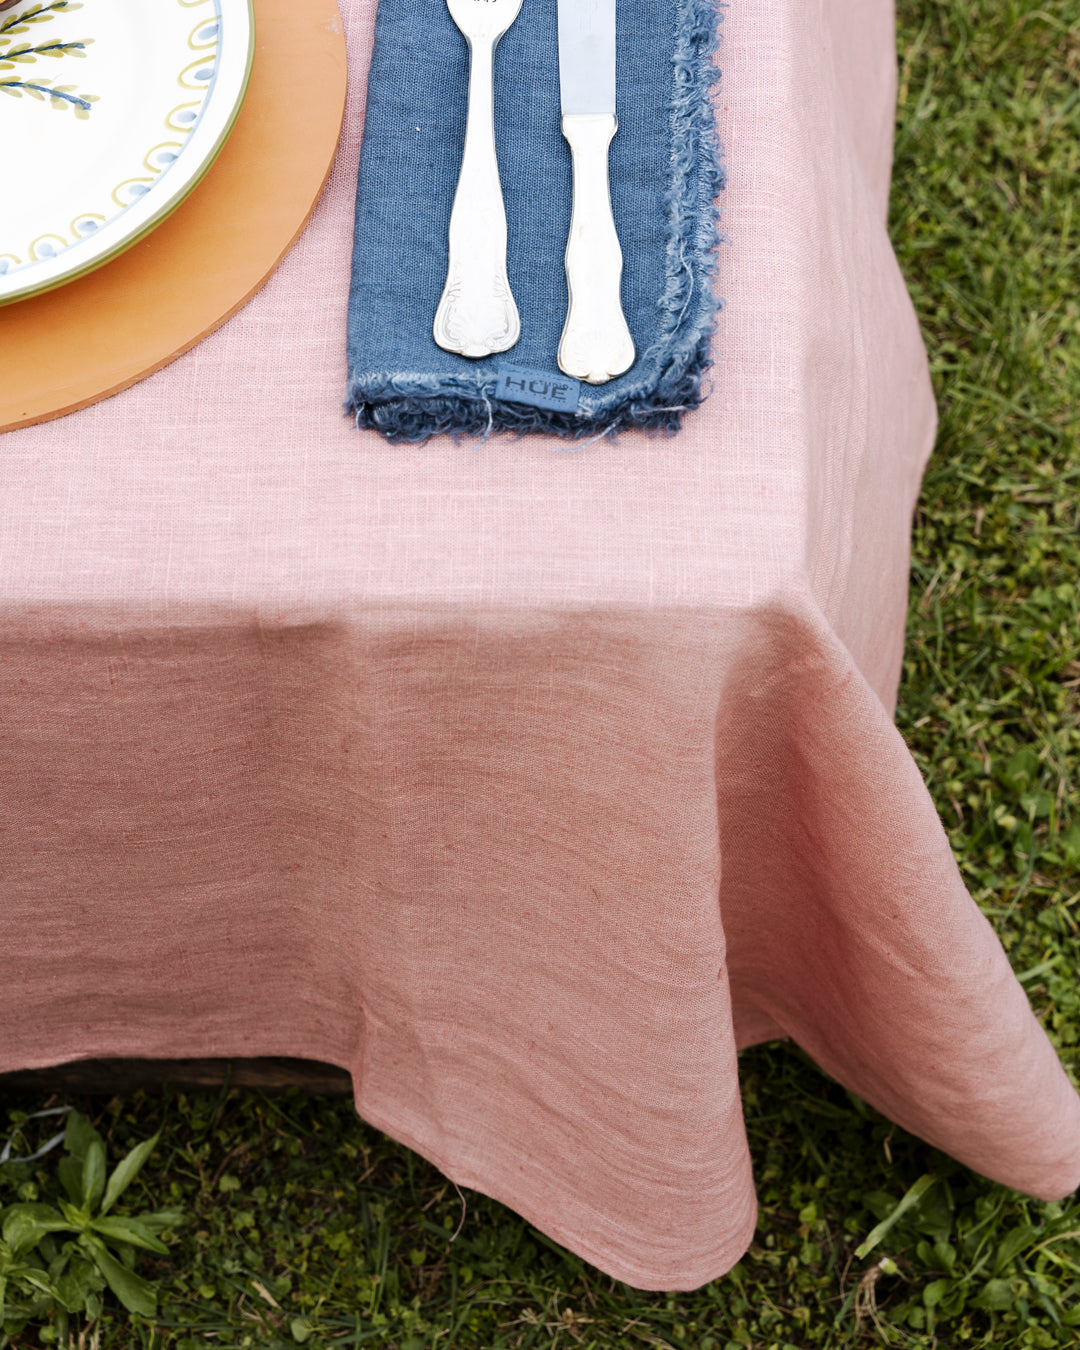 Natural dyed Table linen - Hue table stories